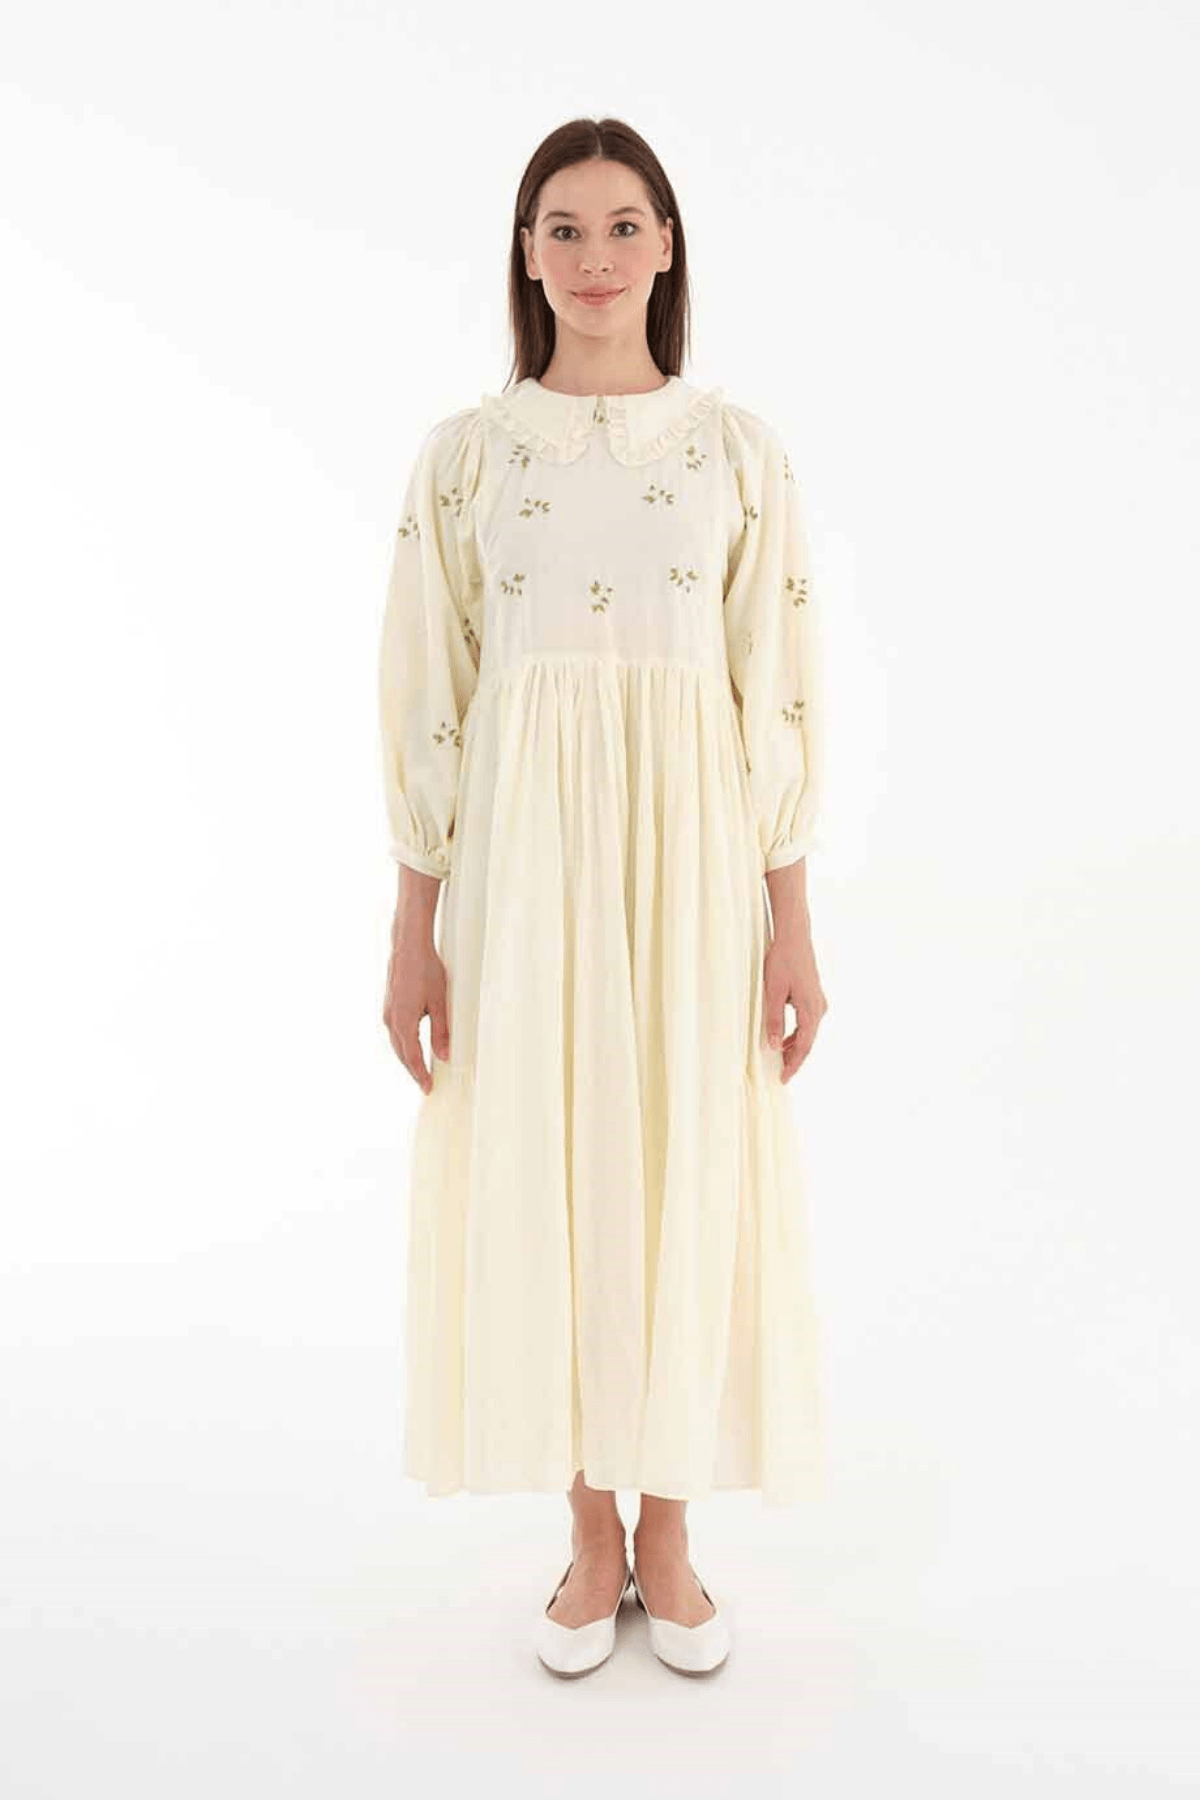 Mable Bohemian Summer Dress in 100% Cotton Dress ByBaano   